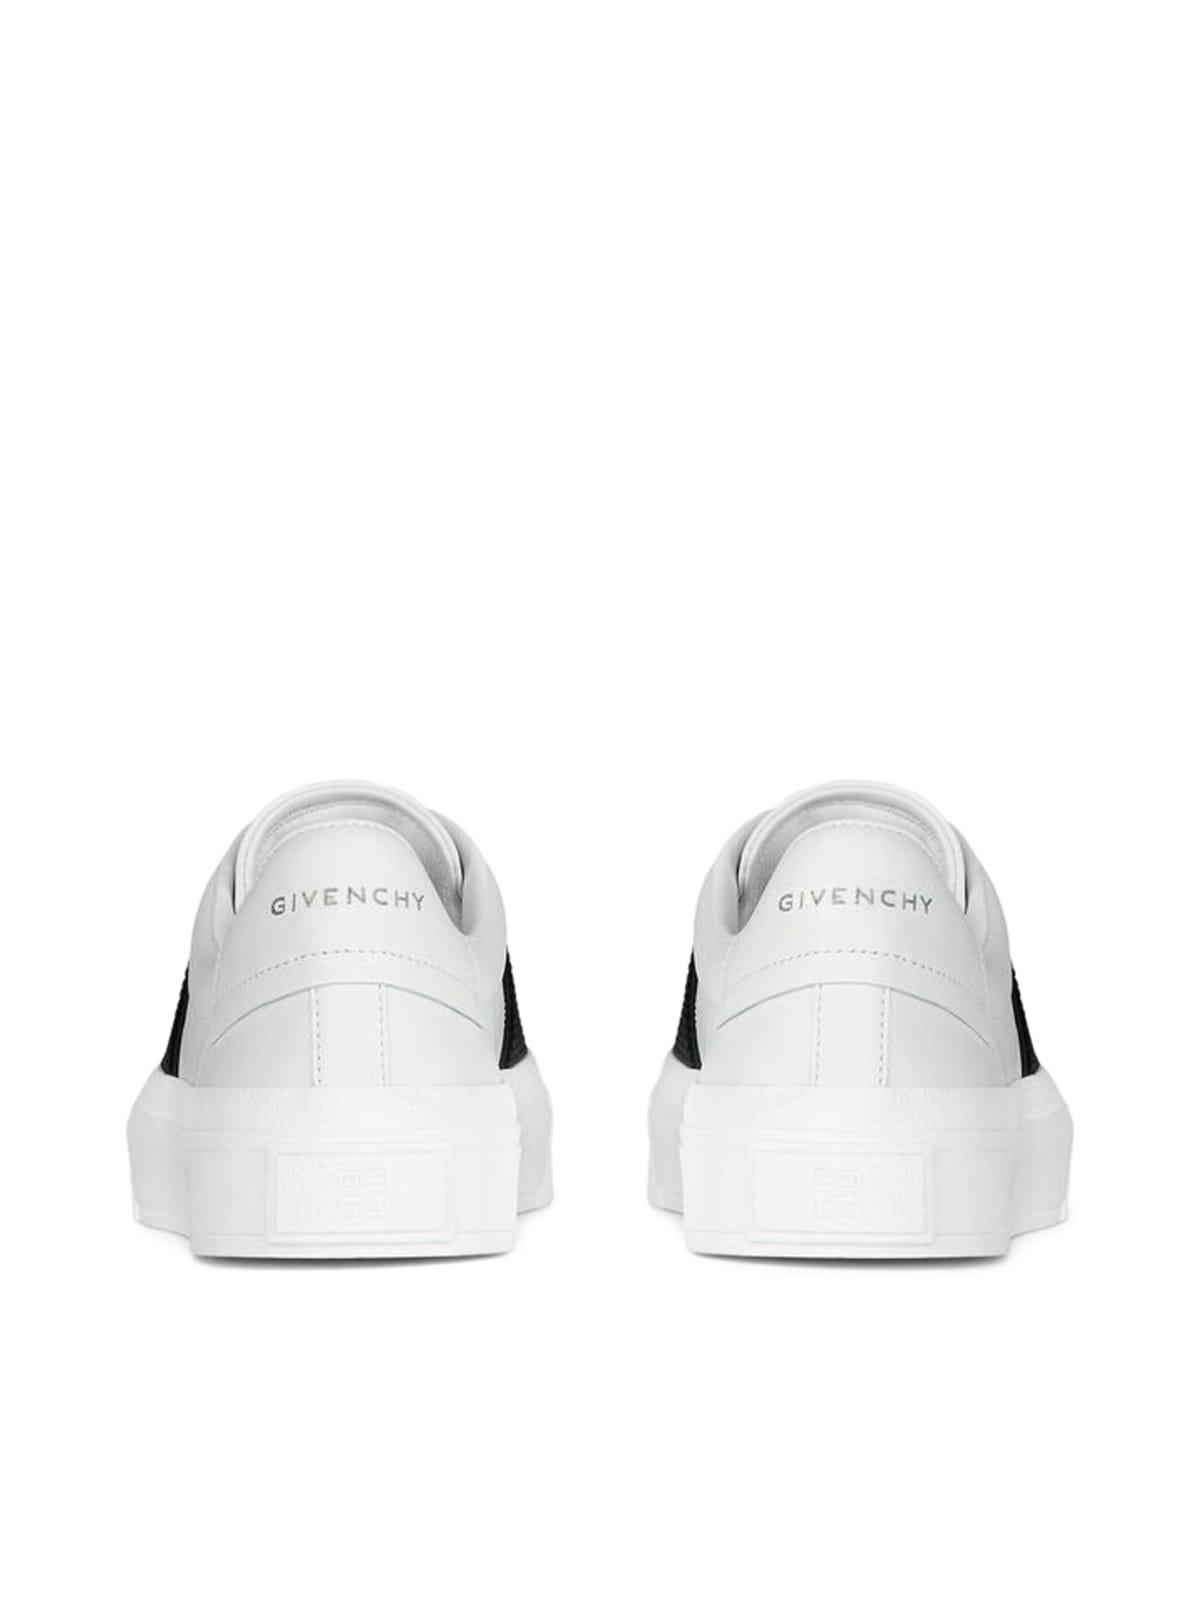 Givenchy Leather City Sport Sneakers in White Black (White) - Save 